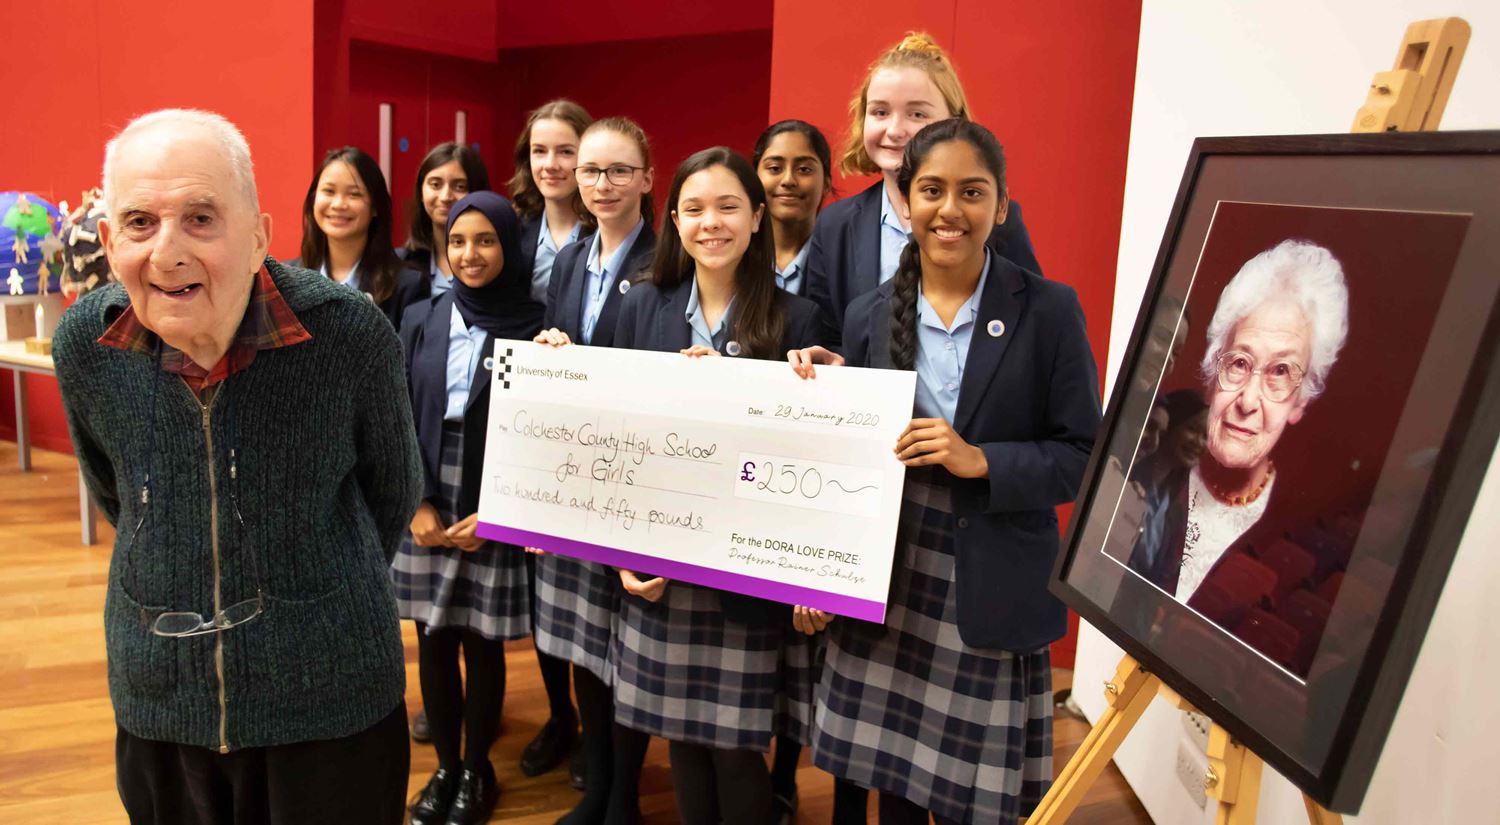 Girls from the Colchester County High School for Girls smiling and holding a large, over-sized cheque, with Holocaust survivor Frank Bright MBE pictured, smiling, in the foreground